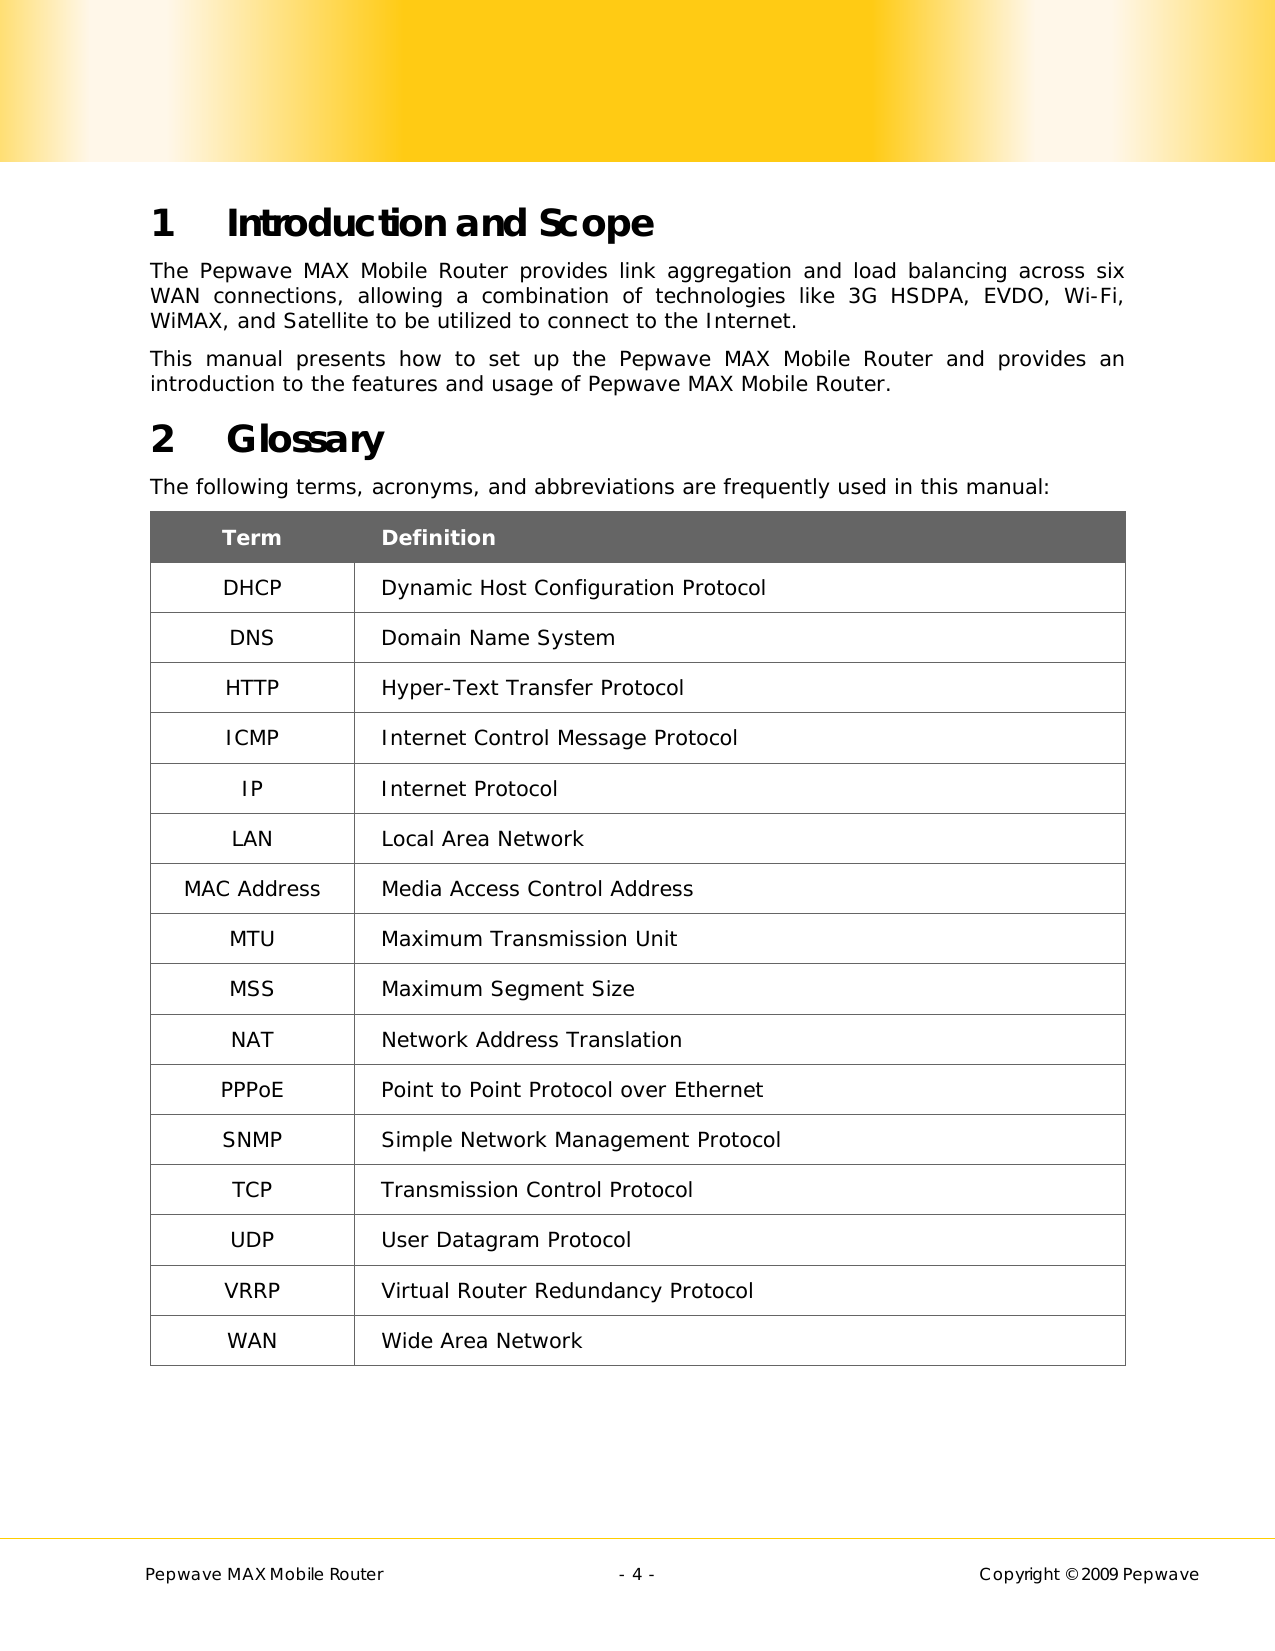        Pepwave MAX Mobile Router    - 4 -   Copyright © 2009 Pepwave 1 Introduction and Scope The Pepwave MAX Mobile Router provides link aggregation and load balancing across six WAN connections, allowing a combination of technologies like 3G HSDPA, EVDO, Wi-Fi, WiMAX, and Satellite to be utilized to connect to the Internet.   This manual presents how to set up the Pepwave MAX Mobile Router and provides an introduction to the features and usage of Pepwave MAX Mobile Router. 2 Glossary The following terms, acronyms, and abbreviations are frequently used in this manual: Term  Definition DHCP  Dynamic Host Configuration Protocol DNS  Domain Name System HTTP  Hyper-Text Transfer Protocol ICMP  Internet Control Message Protocol IP Internet Protocol LAN  Local Area Network MAC Address  Media Access Control Address MTU  Maximum Transmission Unit MSS  Maximum Segment Size NAT Network Address Translation PPPoE  Point to Point Protocol over Ethernet SNMP Simple Network Management Protocol TCP Transmission Control Protocol UDP  User Datagram Protocol VRRP  Virtual Router Redundancy Protocol WAN  Wide Area Network  